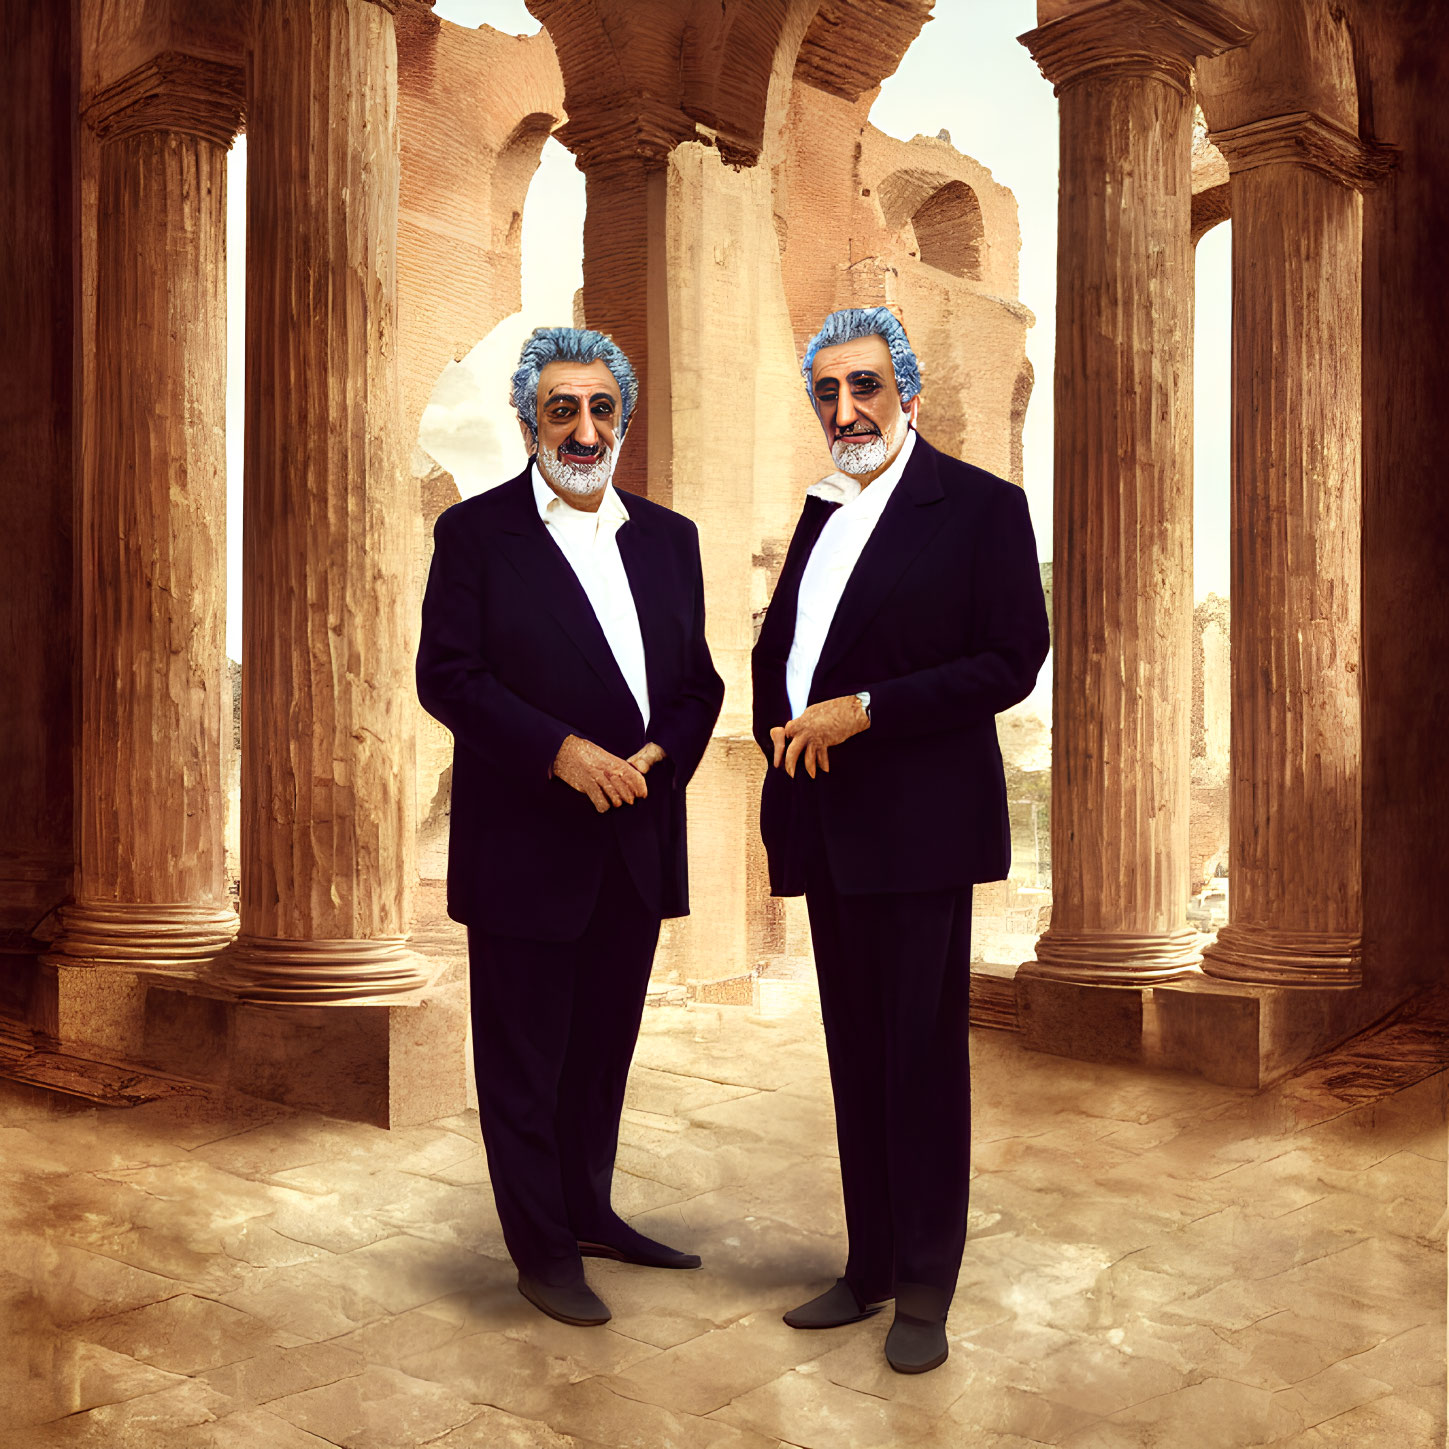 Identical figures in suits with exaggerated facial features among ancient ruins